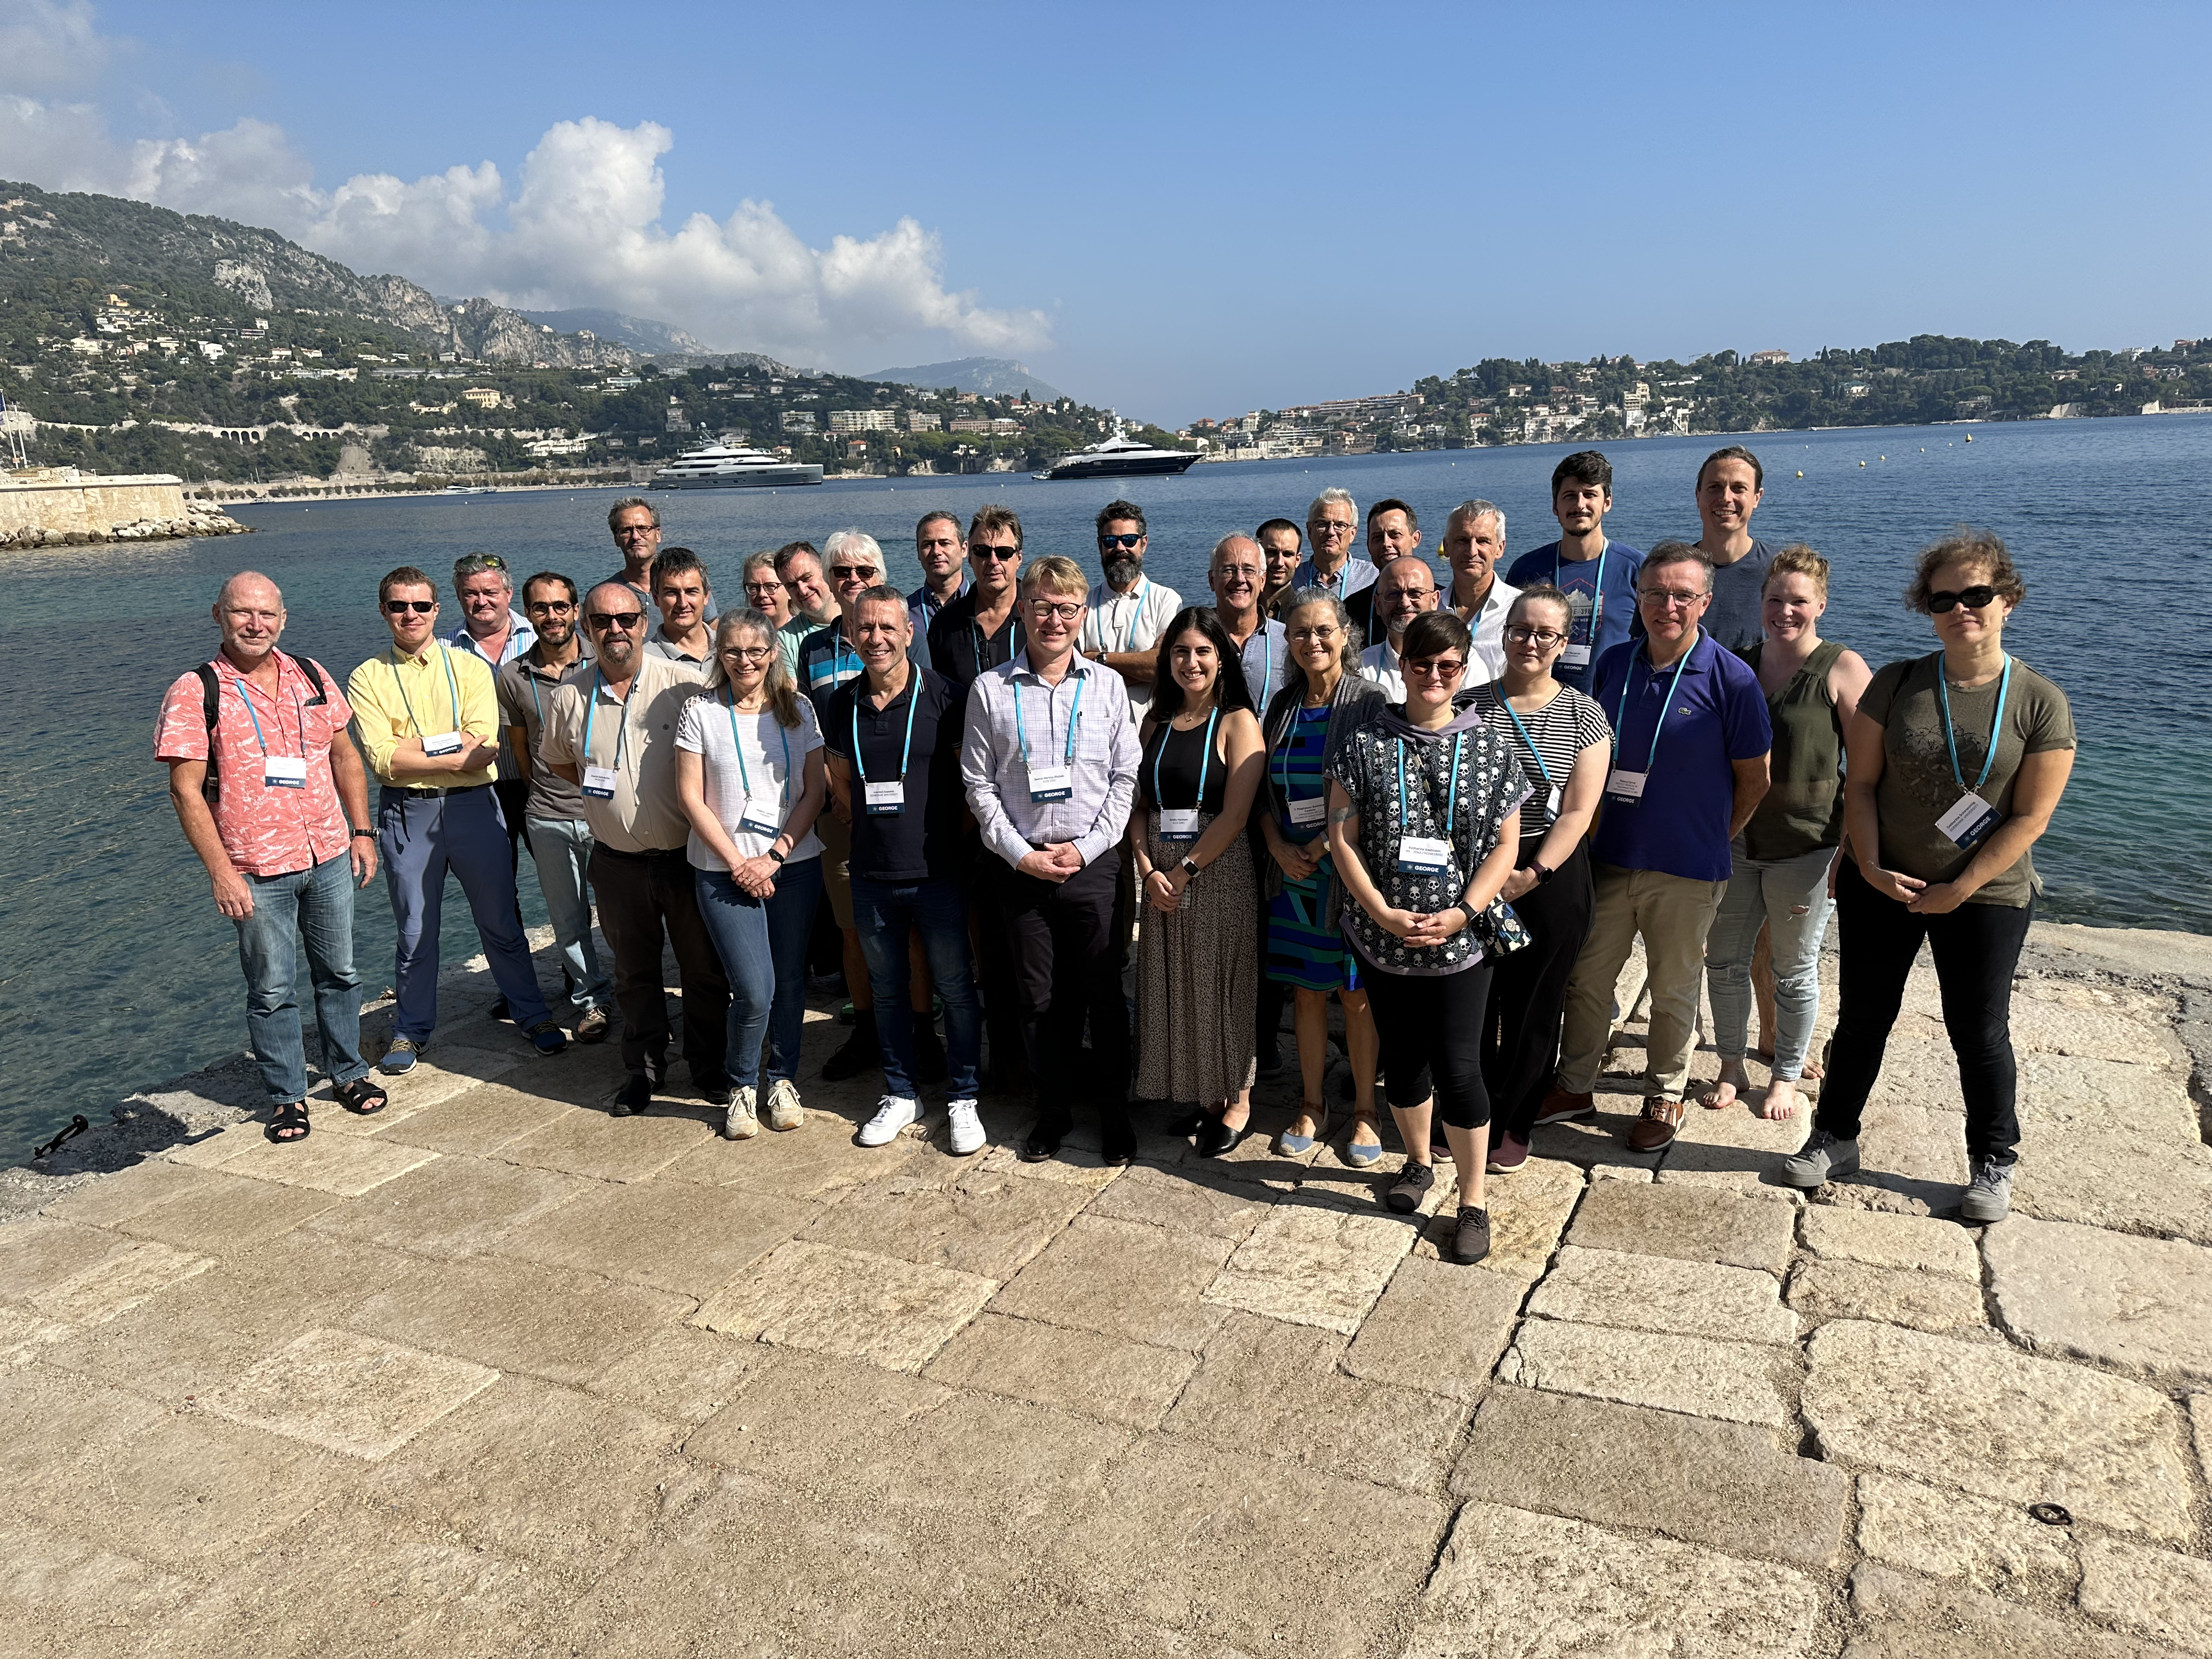 The first GEORGE annual meeting held in Villefranche-sur-Mer